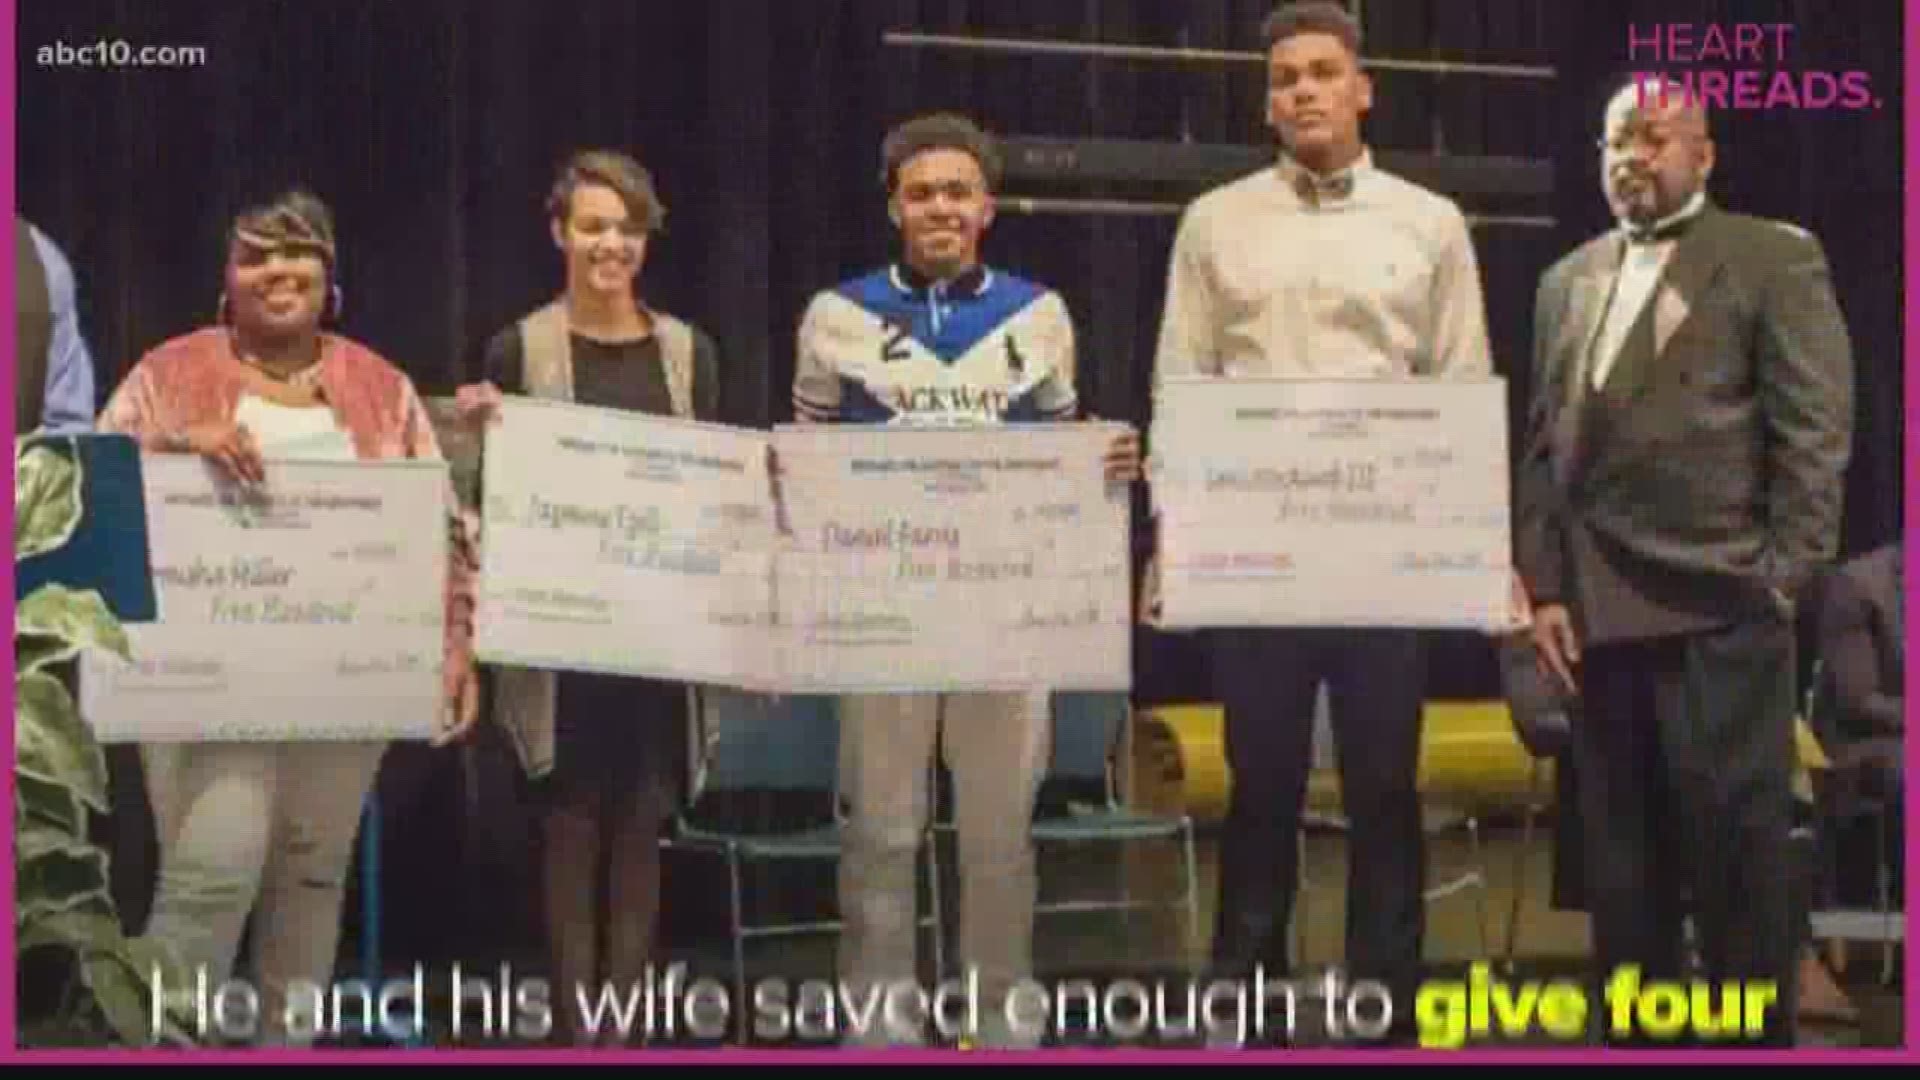 A high school custodian uses his own money to change to lives of students.